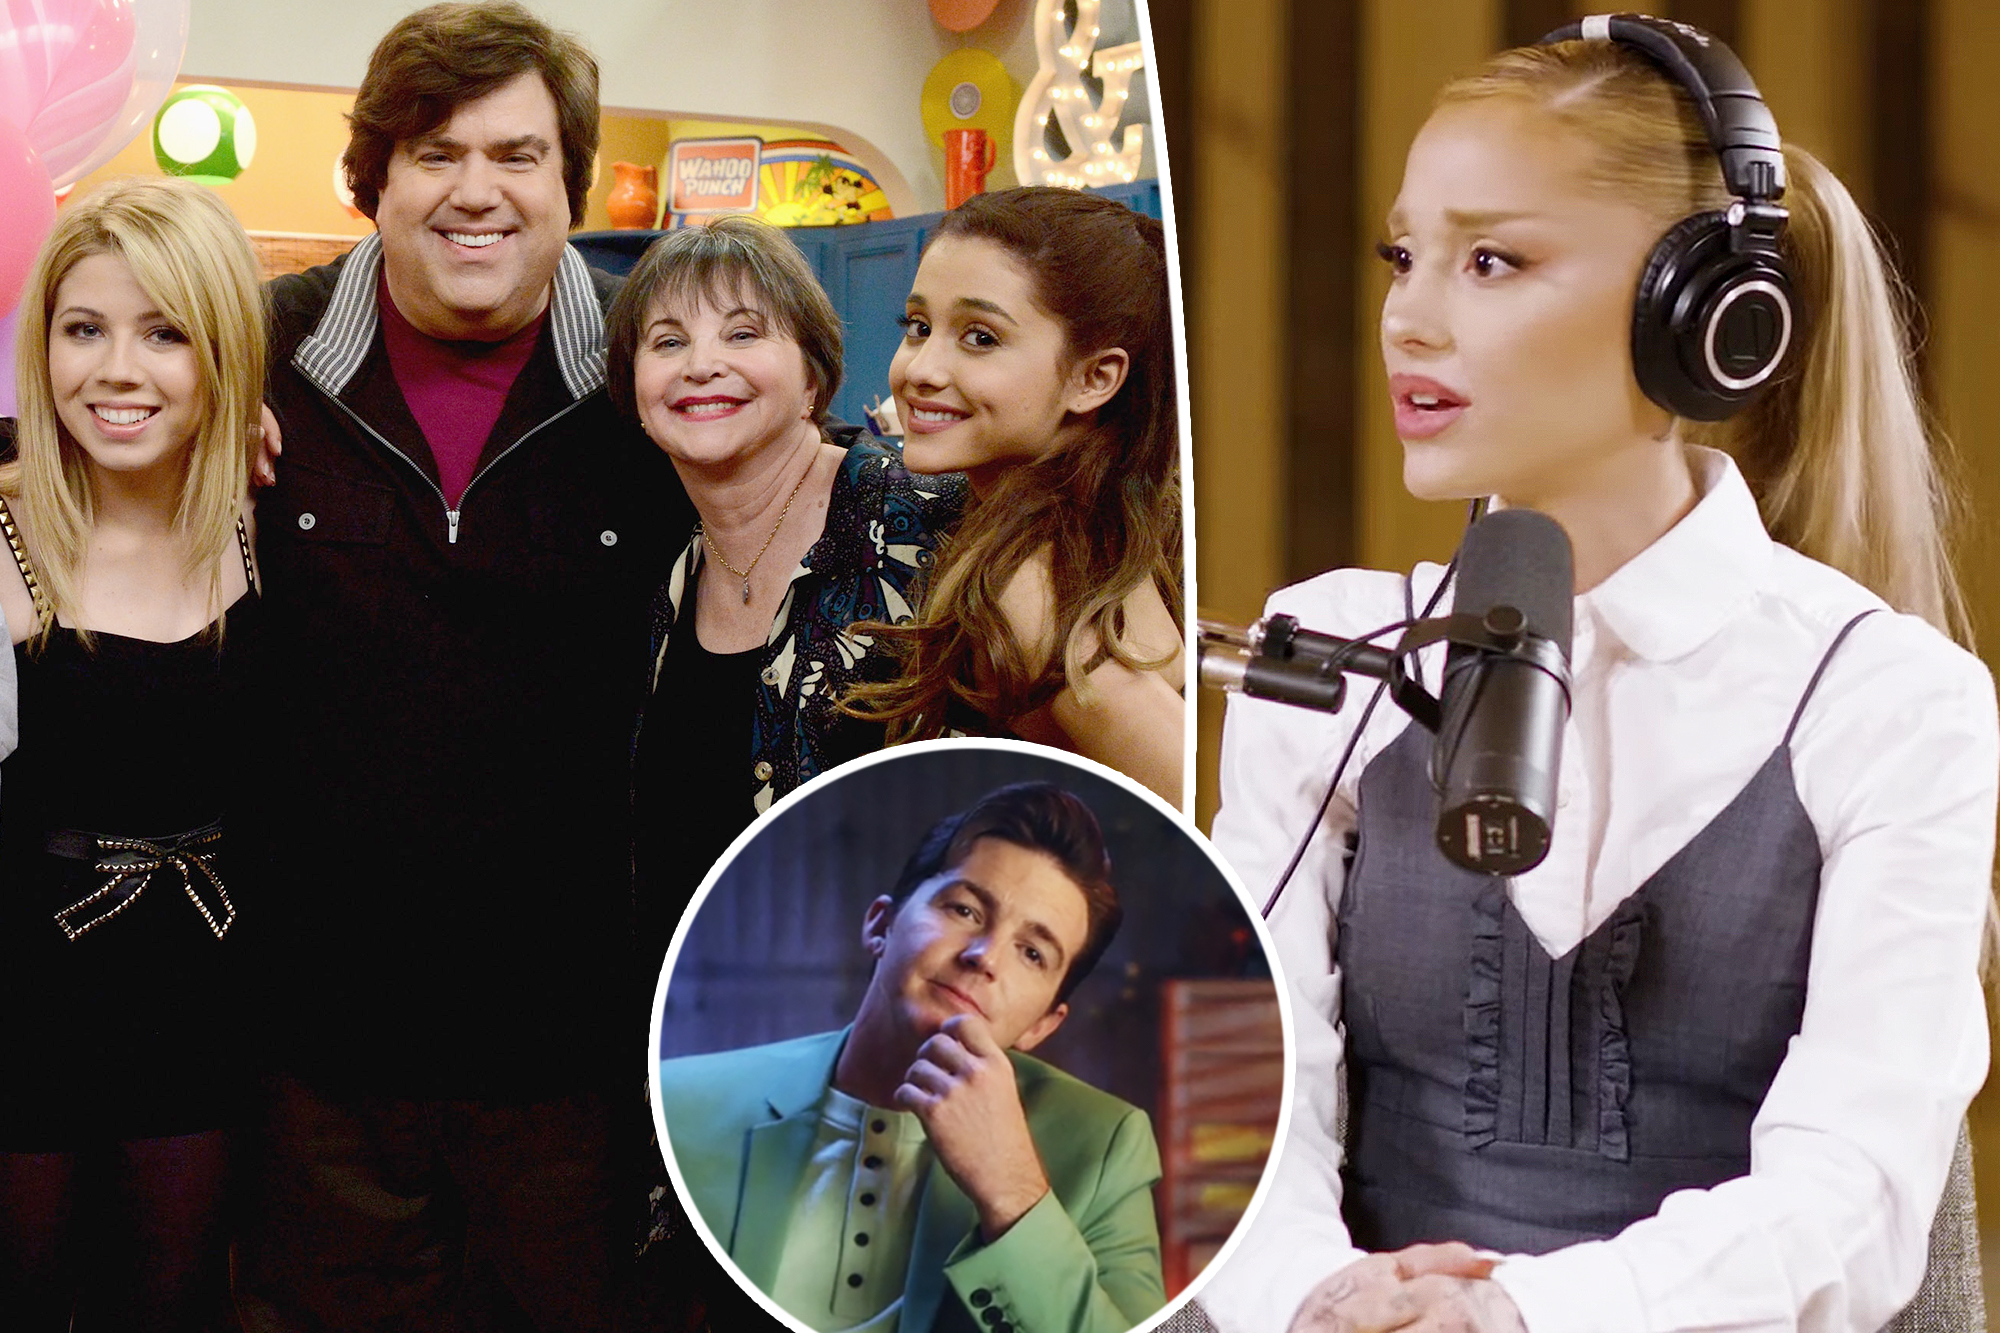 Ariana Grande Reflects on Past Nickelodeon Experience: A Journey of Self-Discovery